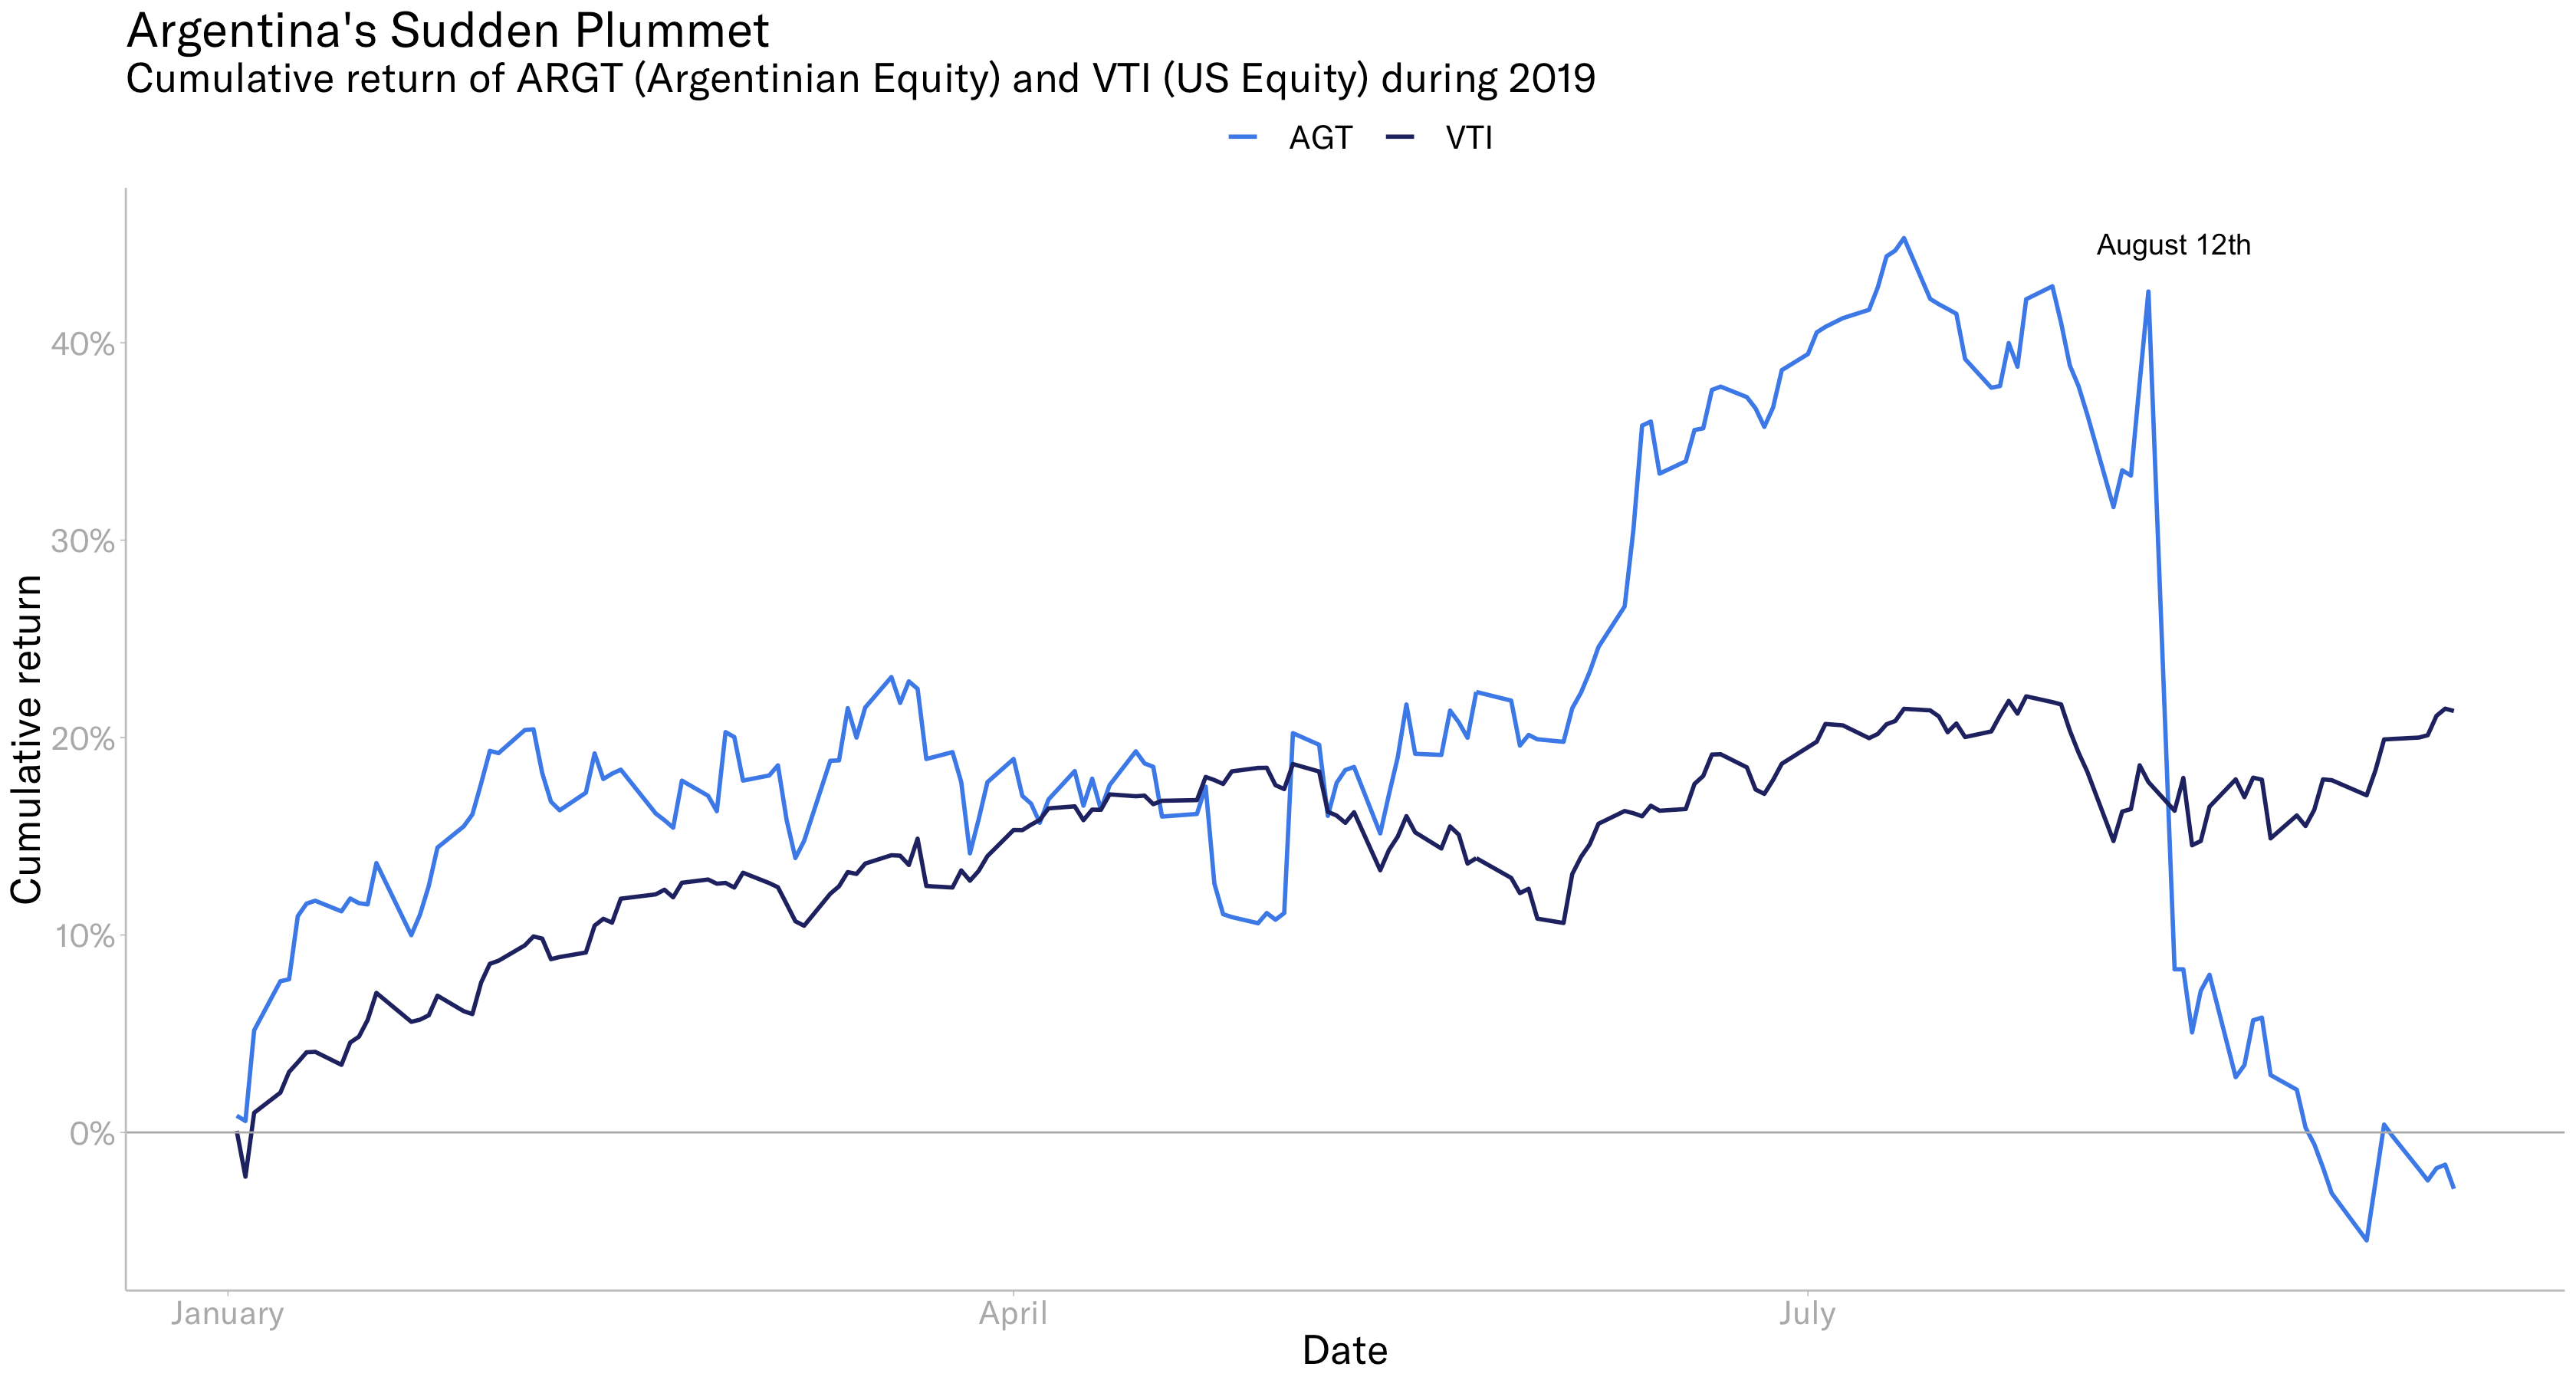 Cumulative return of ARGT (Argentinian Equity) and VTI (US Equity) during 2019